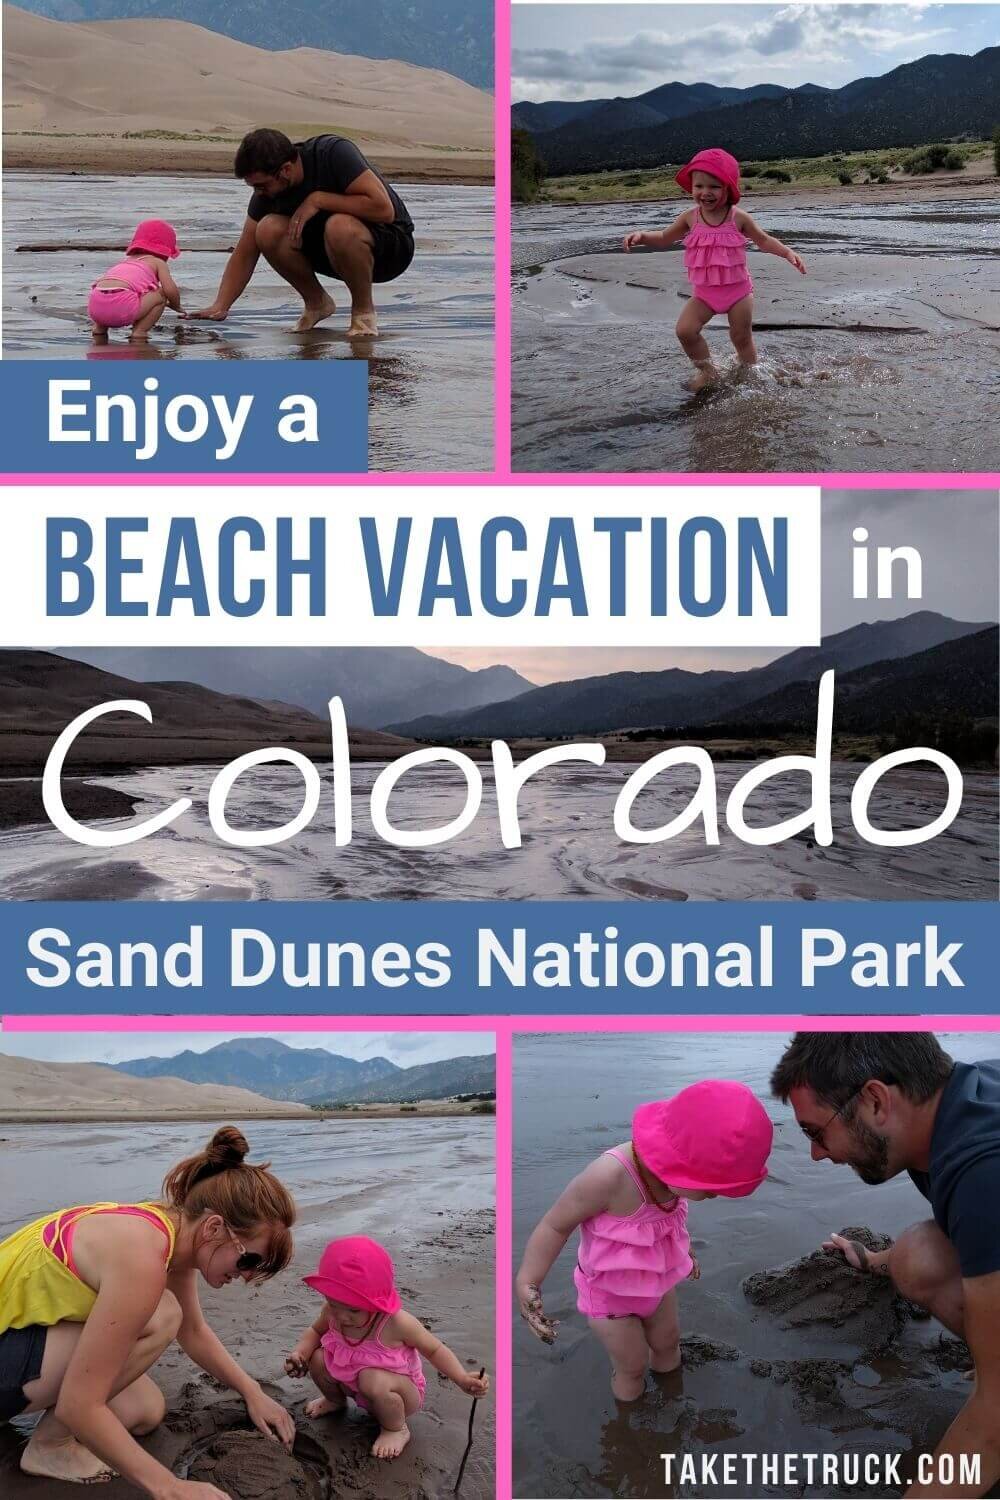 Visiting Great Sand Dunes National Park with kids is a relaxing family vacation in Colorado! Check out this post to see why Sand Dunes National Park should be on your bucket list with kids.